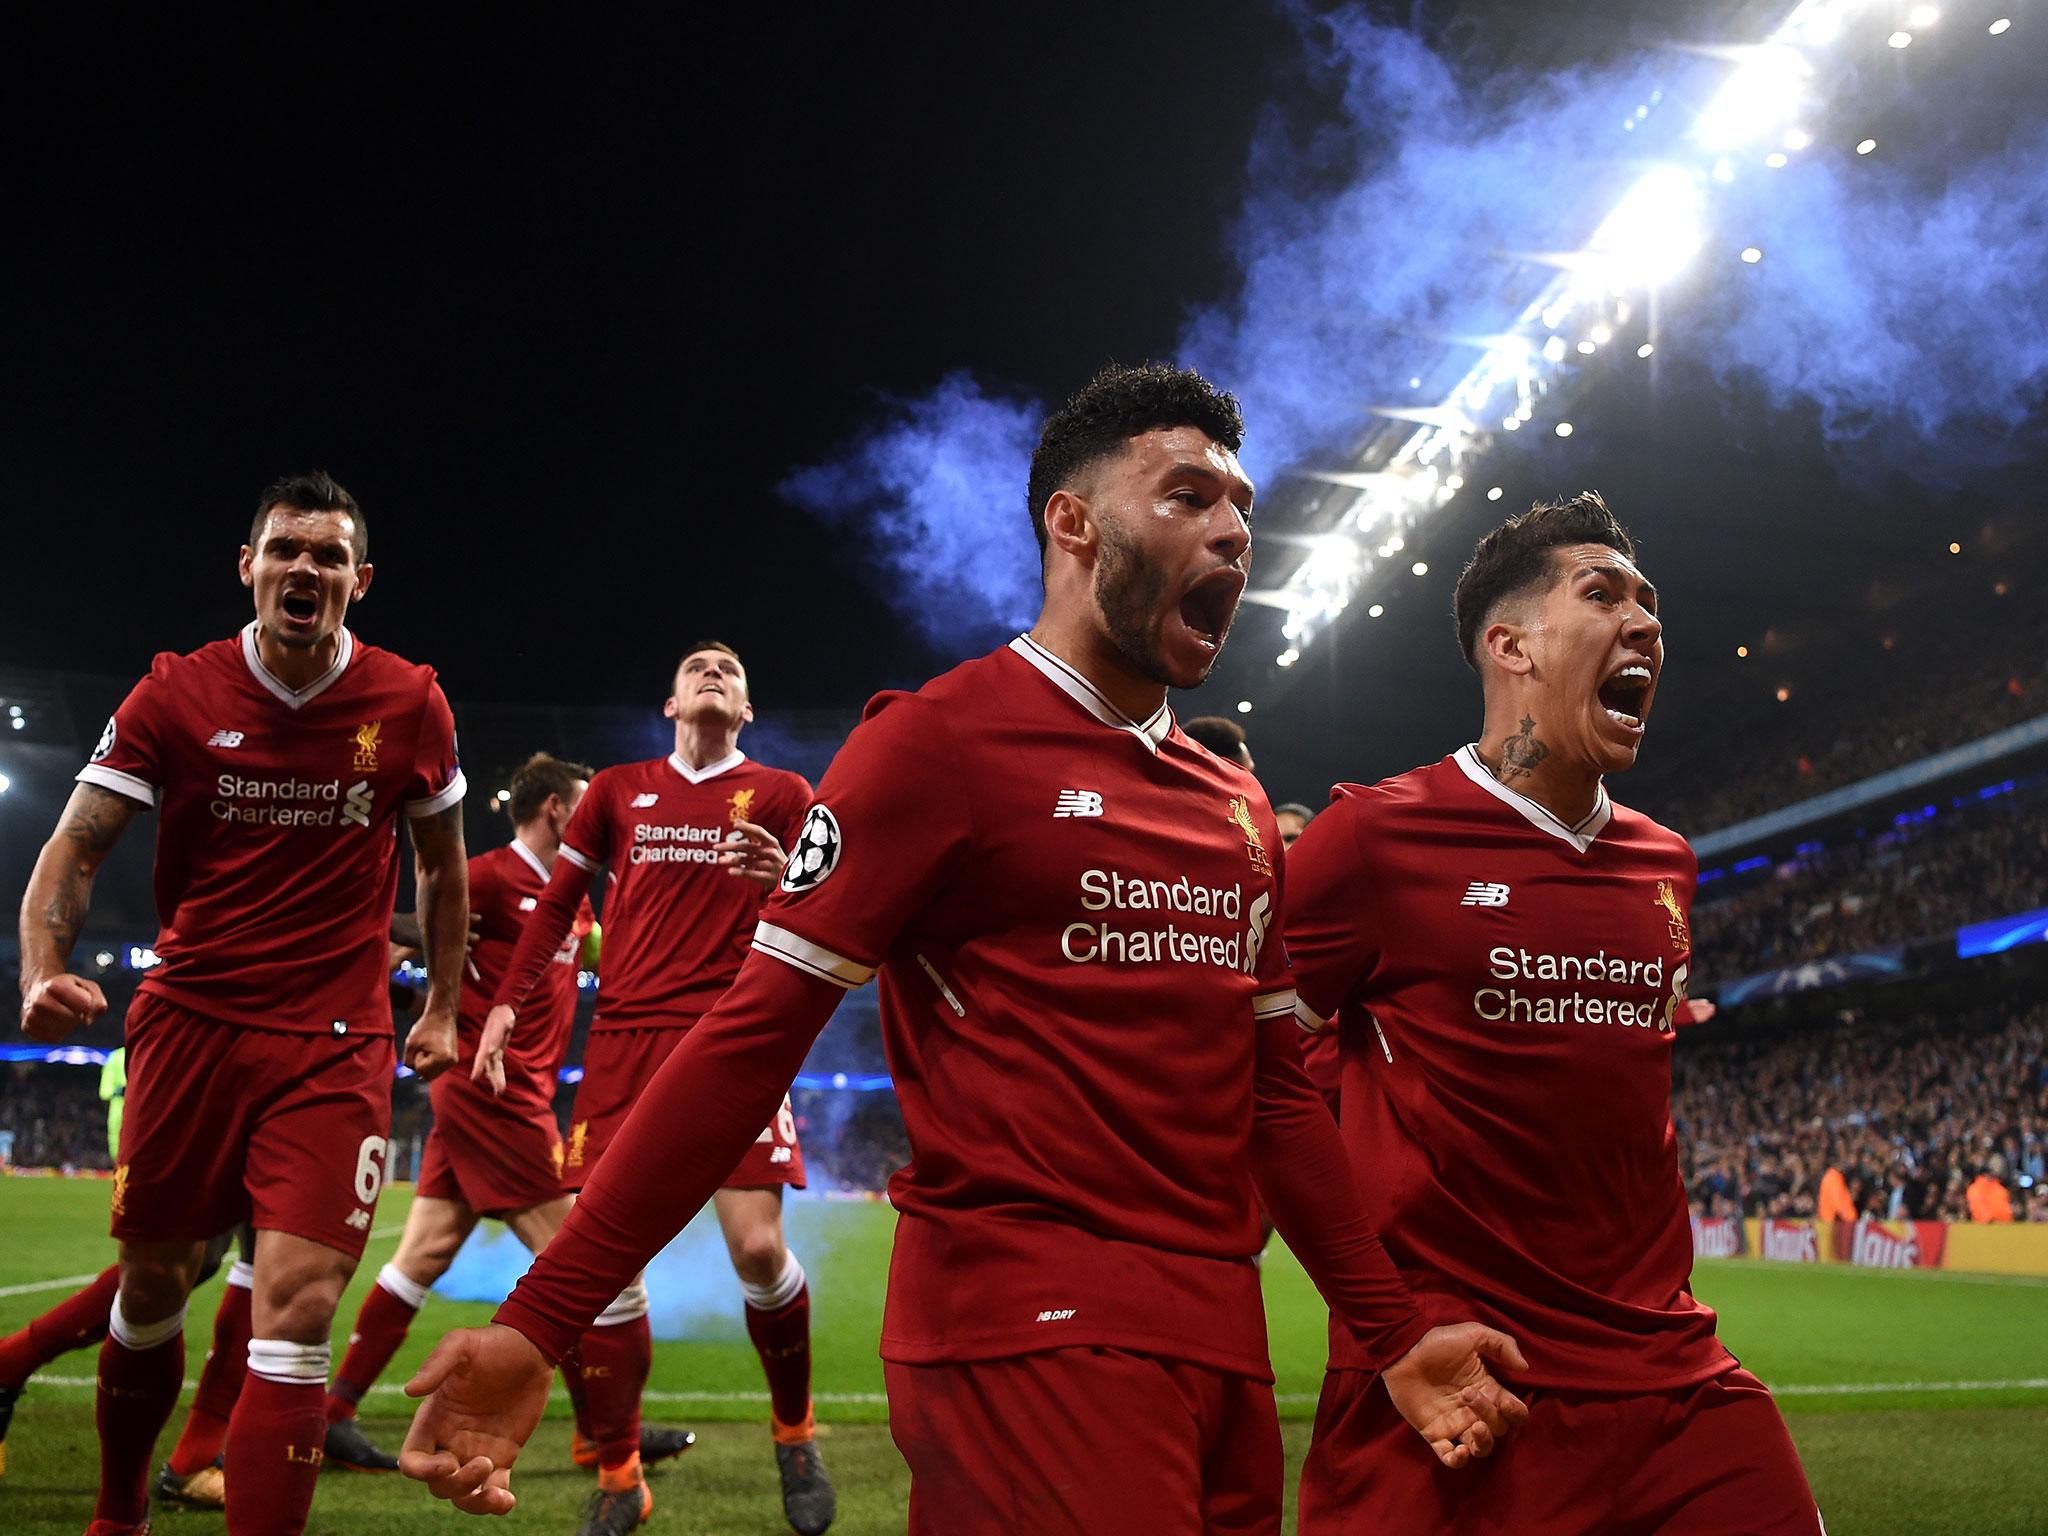 Liverpool earned a place in the Champions League semi-finals